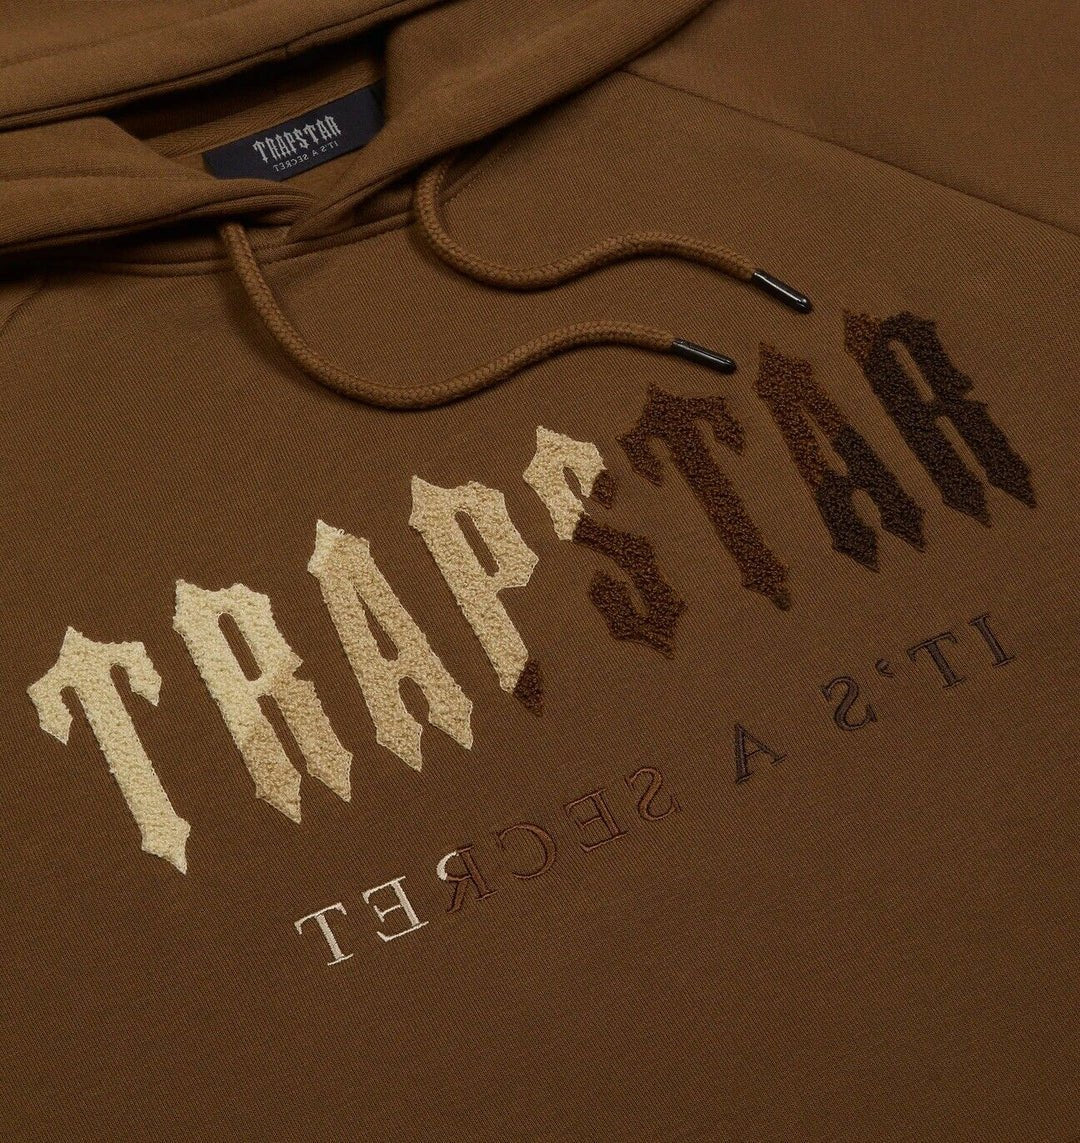 TRAPSTAR CHENILLE DECODED HOODIE TRACKSUIT ‘EARTH EDITION BROWN’